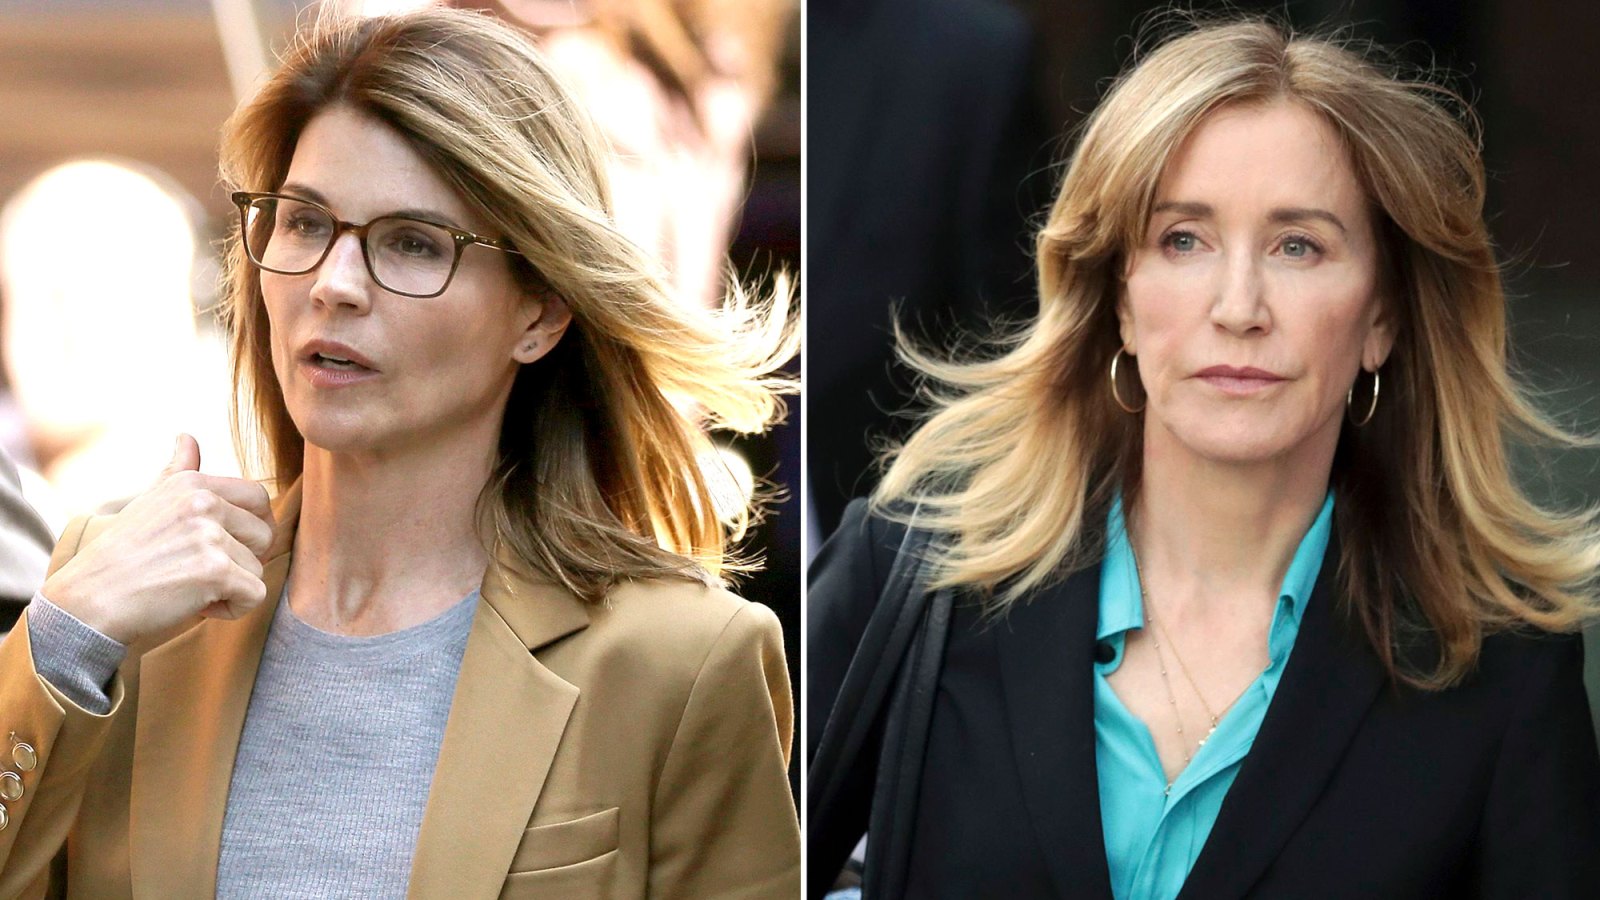 https://www.usmagazine.com/wp-content/uploads/2019/10/Lifetime%E2%80%99s-College-Admissions-Scandal-Movie-Doesn%E2%80%99t-Reference-Lori-Loughlin-or-Felicity-Huffman-1.jpg?crop=0px%2C41px%2C2000px%2C1131px&resize=1600%2C900&quality=86&strip=all